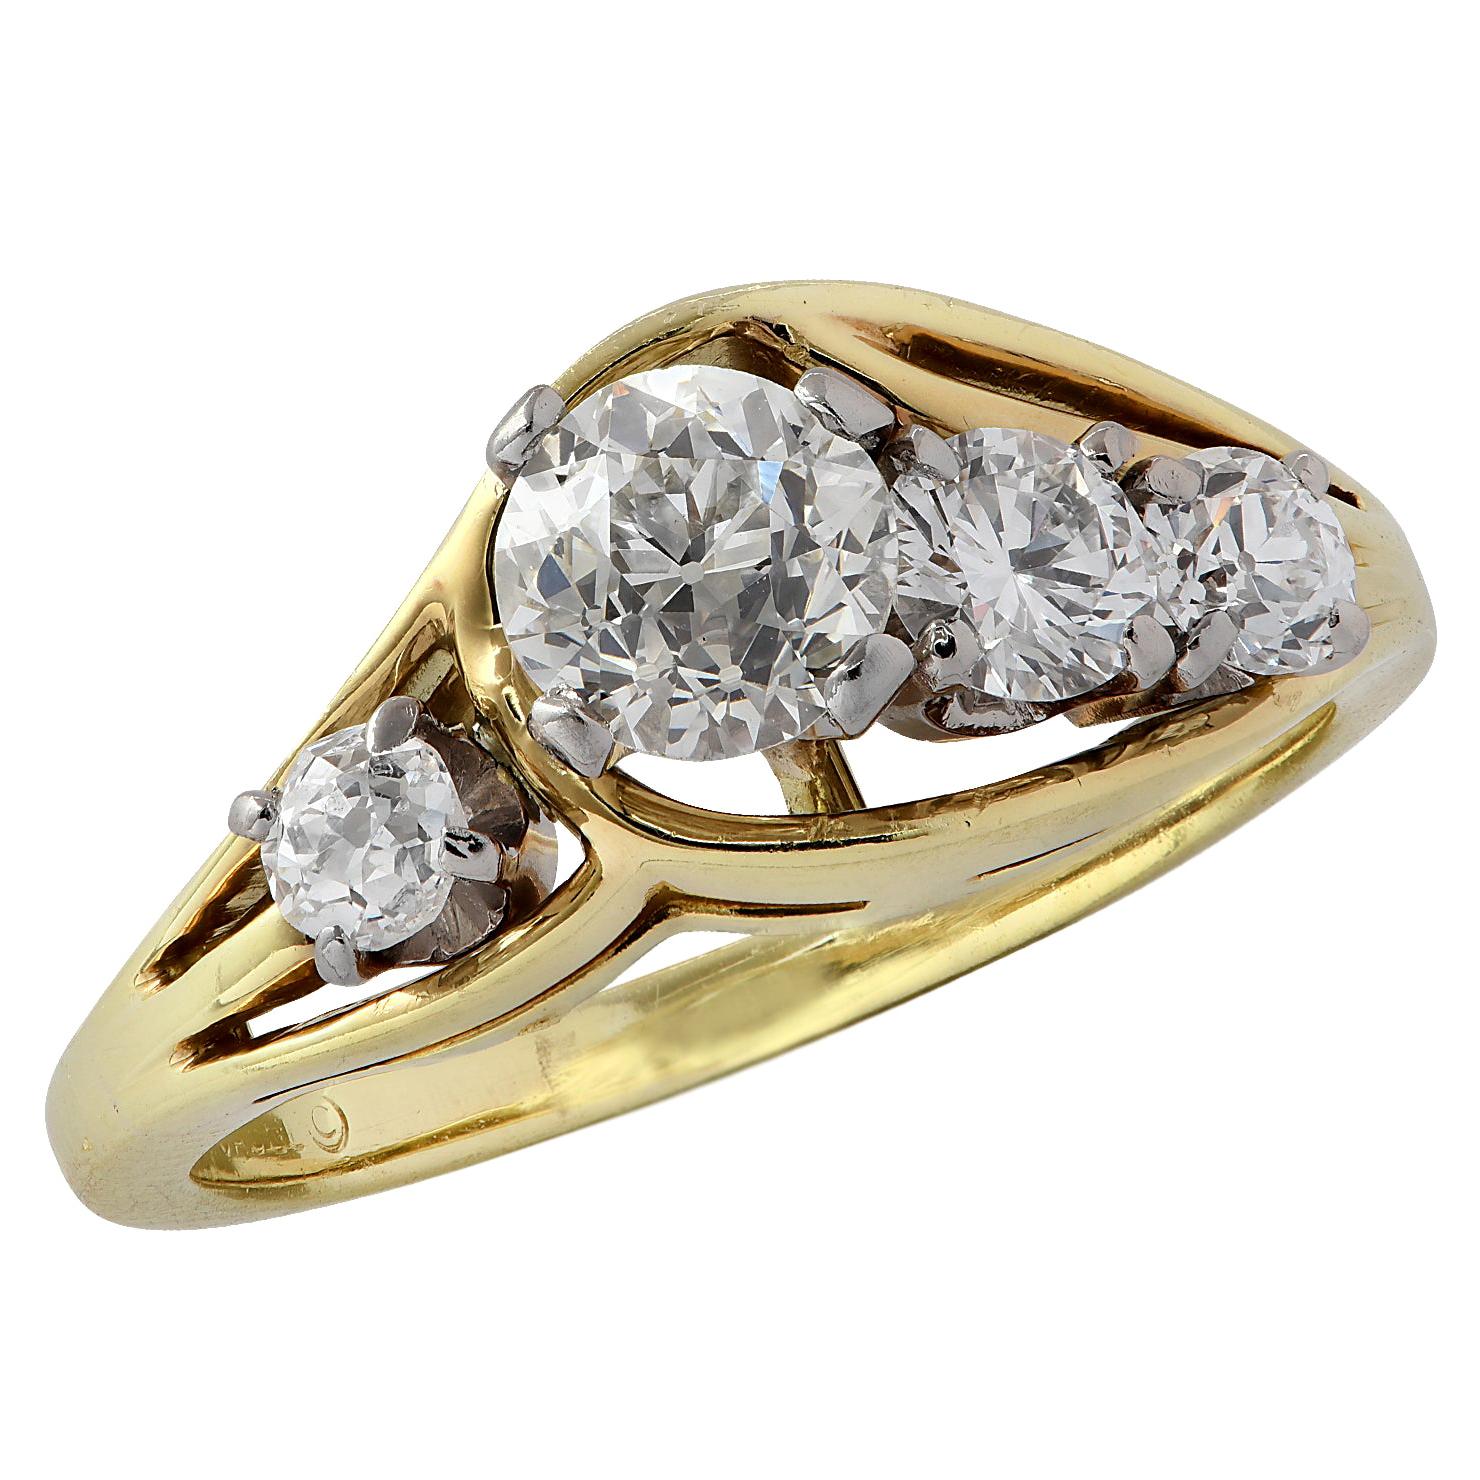 1 Carat Old Mine Cut Diamond and Yellow Gold Ring